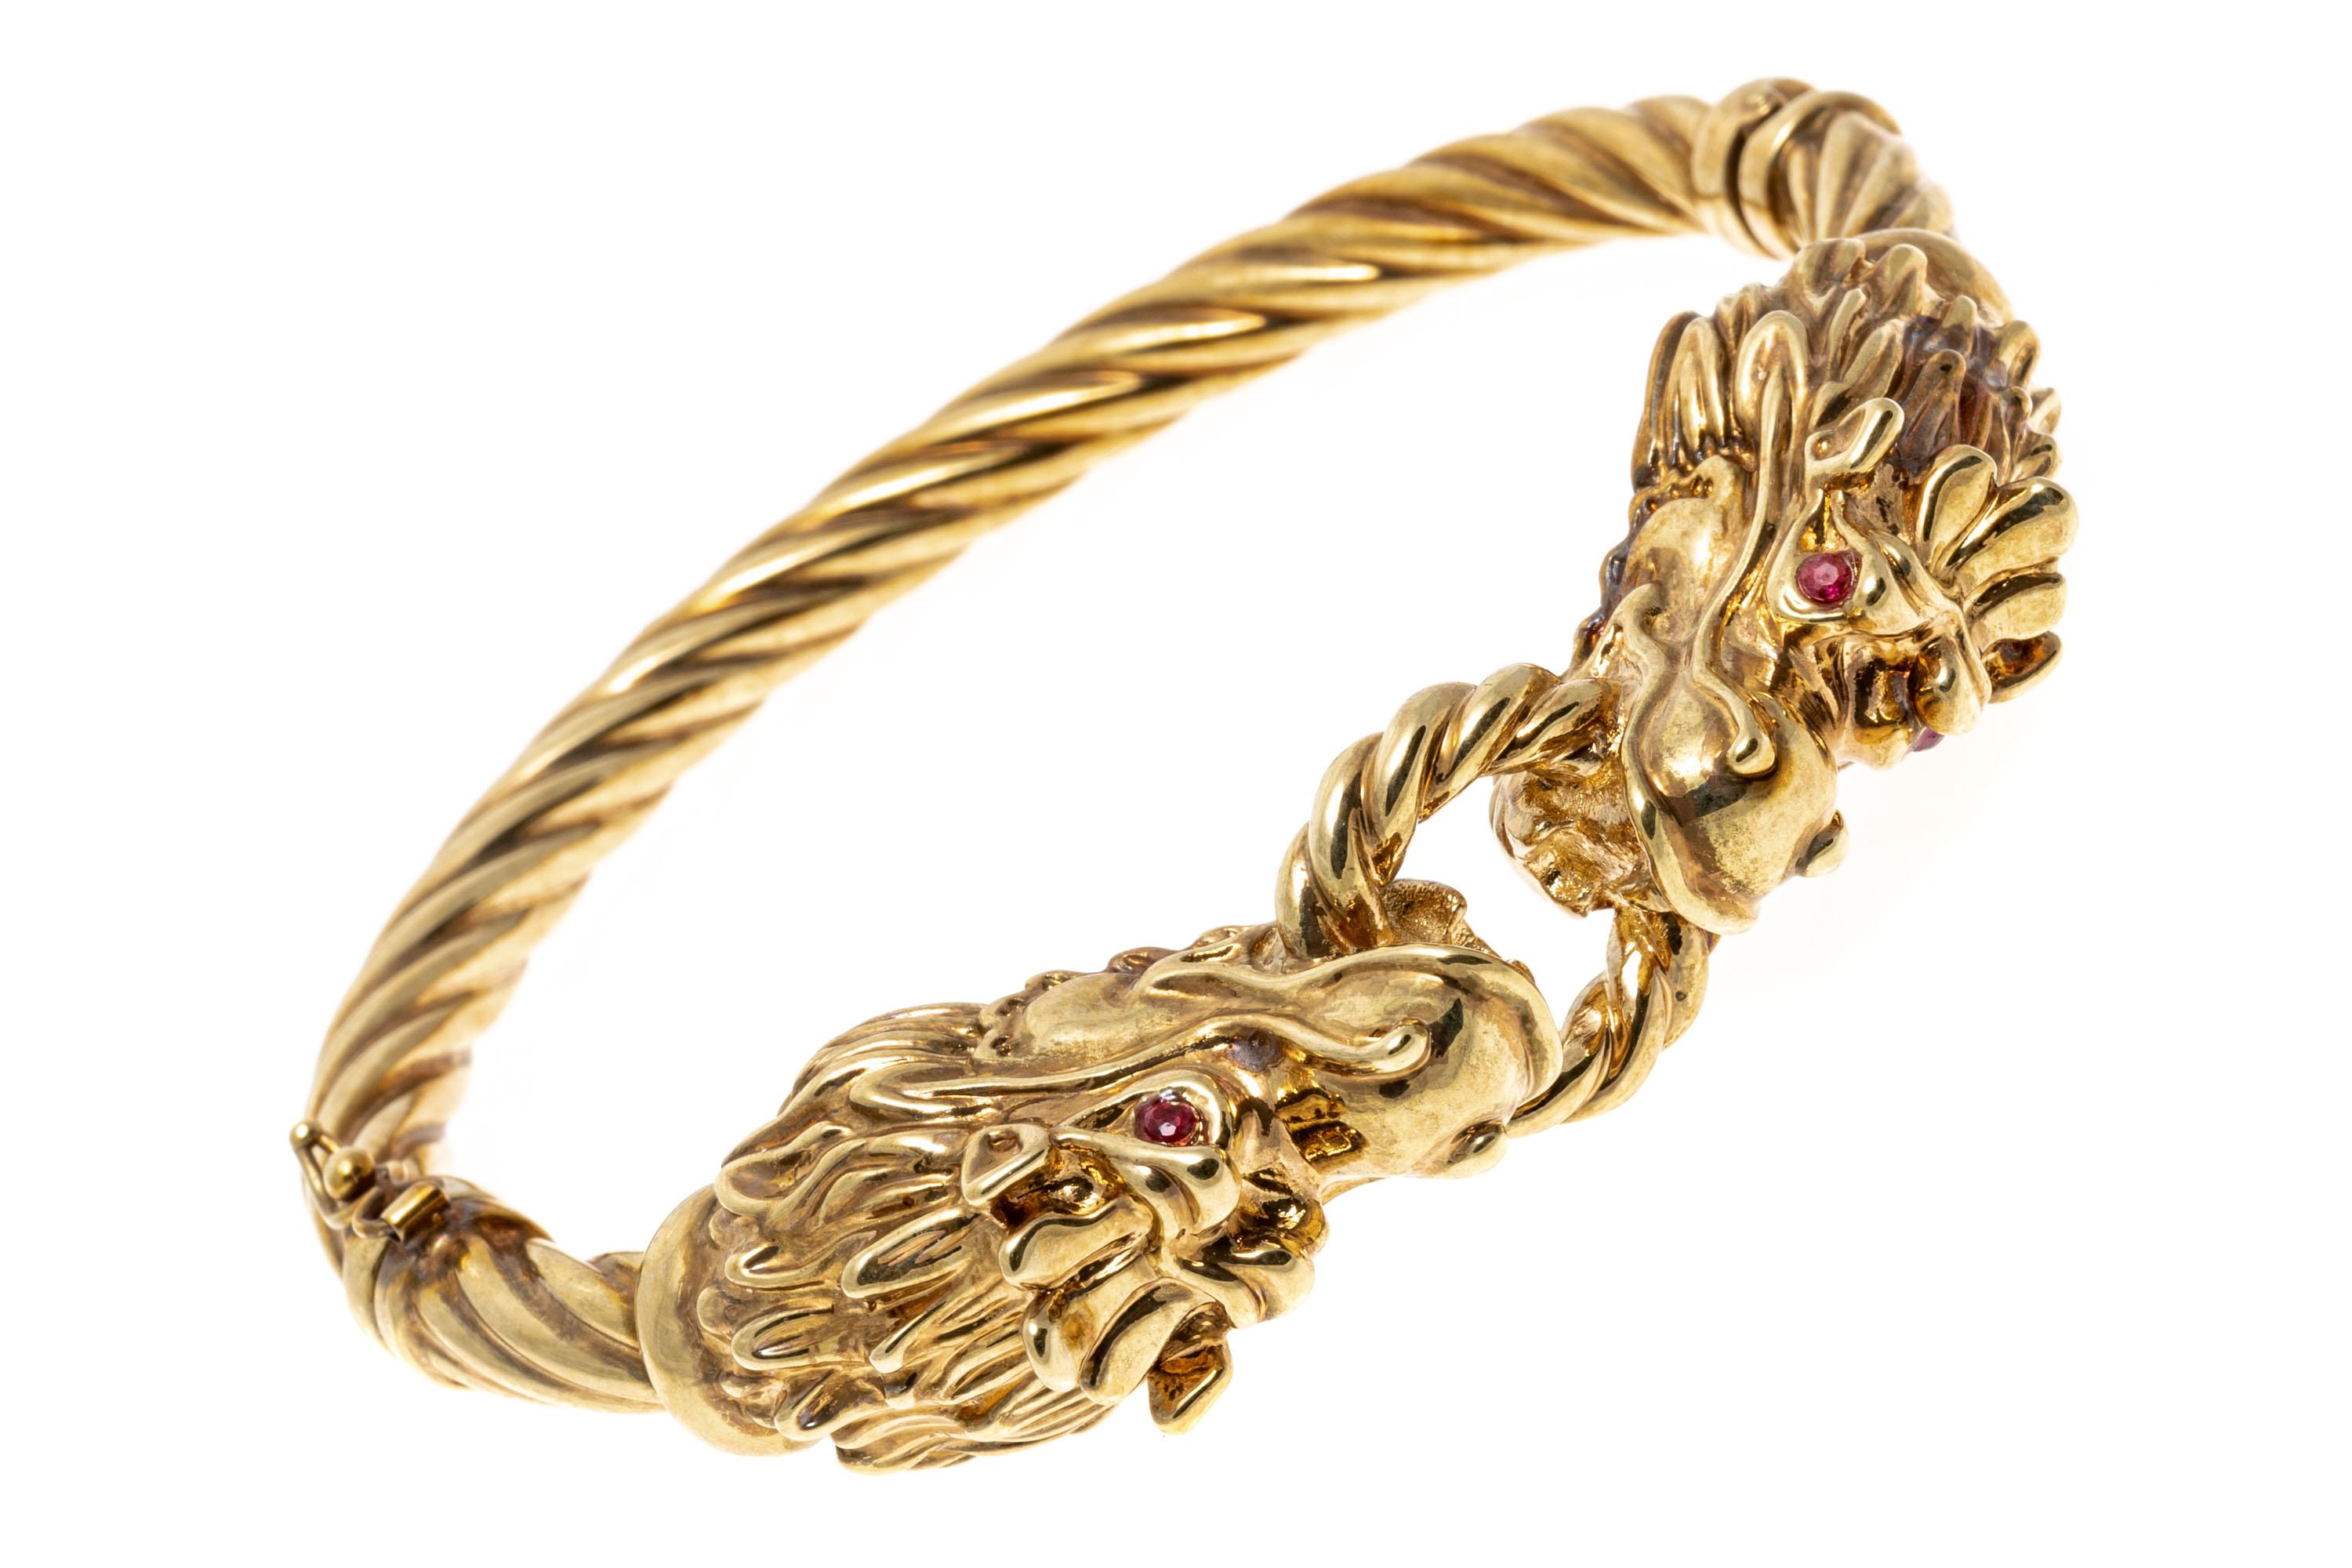 14k Yellow Gold Facing Dragons Hinged Twisted Bangle Bracelet
This striking twisted hinged bangle bracelet features an impactful center of two facing figural dragon's heads, holding a twisted center ring of yellow gold in their mouths between them.